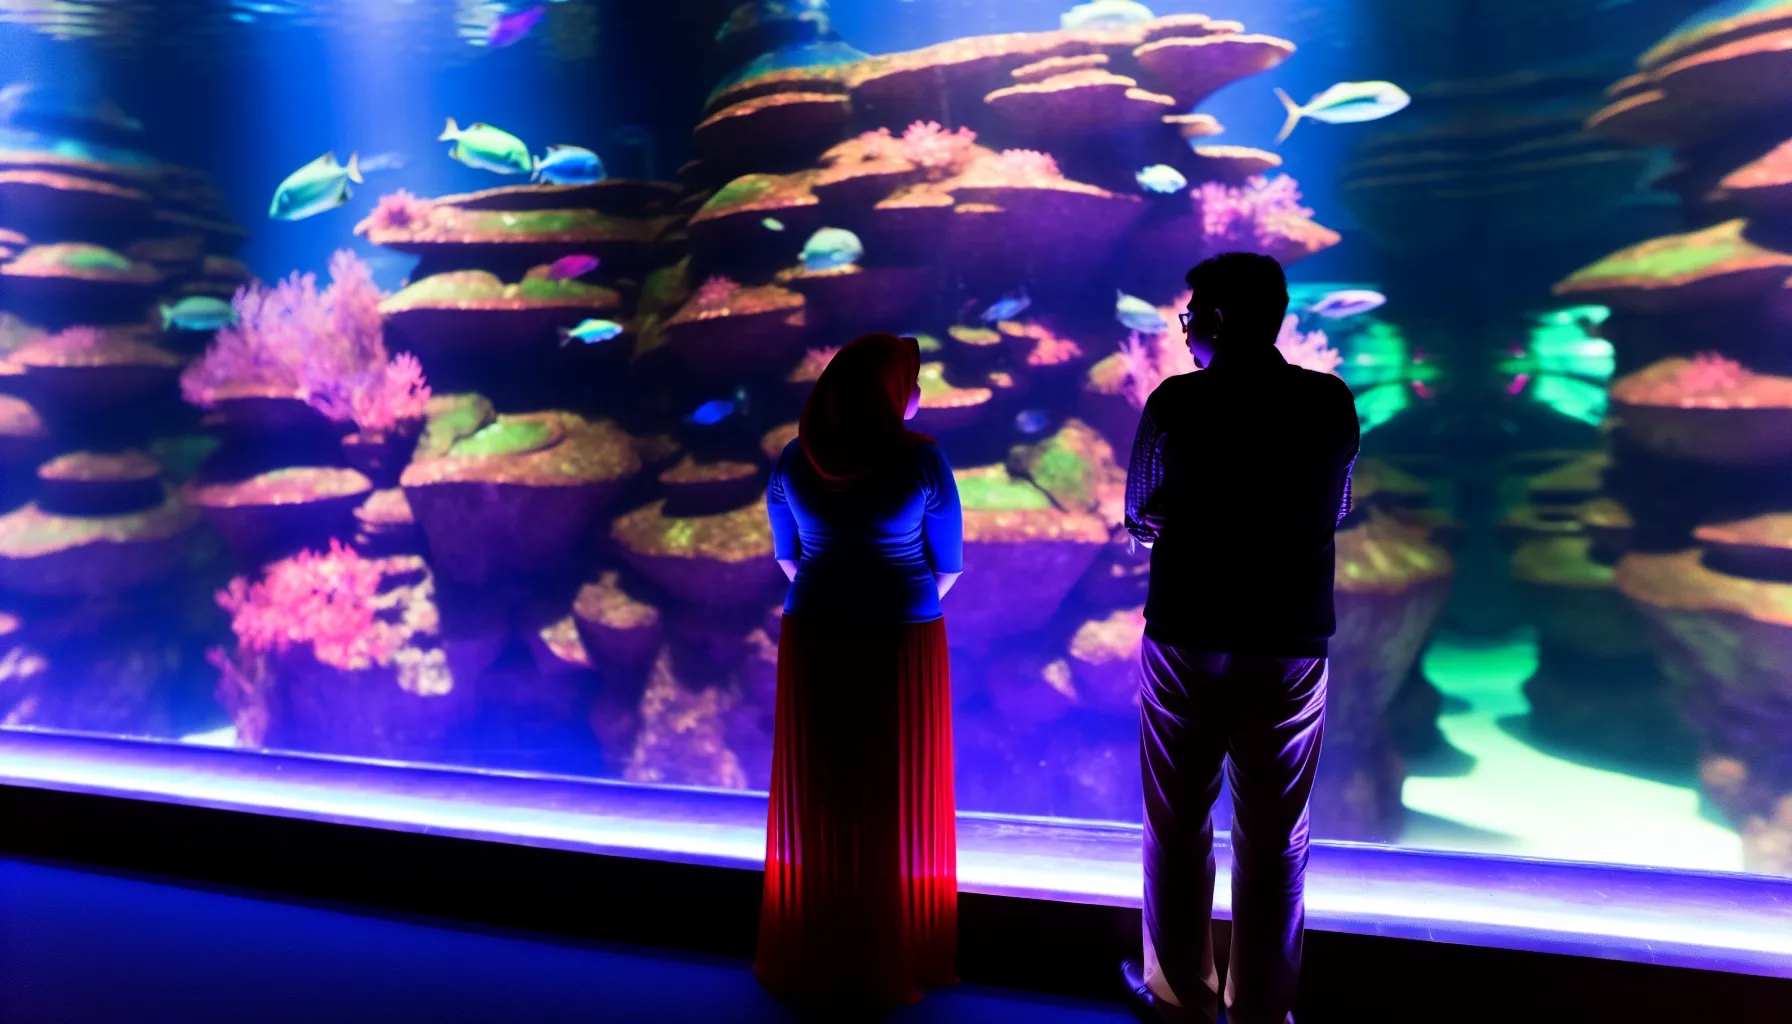 <strong>Underwater Serenade:</strong> Amidst a sea of iridescent scales and tranquil blue hues, a couple finds a shared rhythm in the silent symphony of marine life—a serene backdrop that echoes the depth and mystery of new connections.